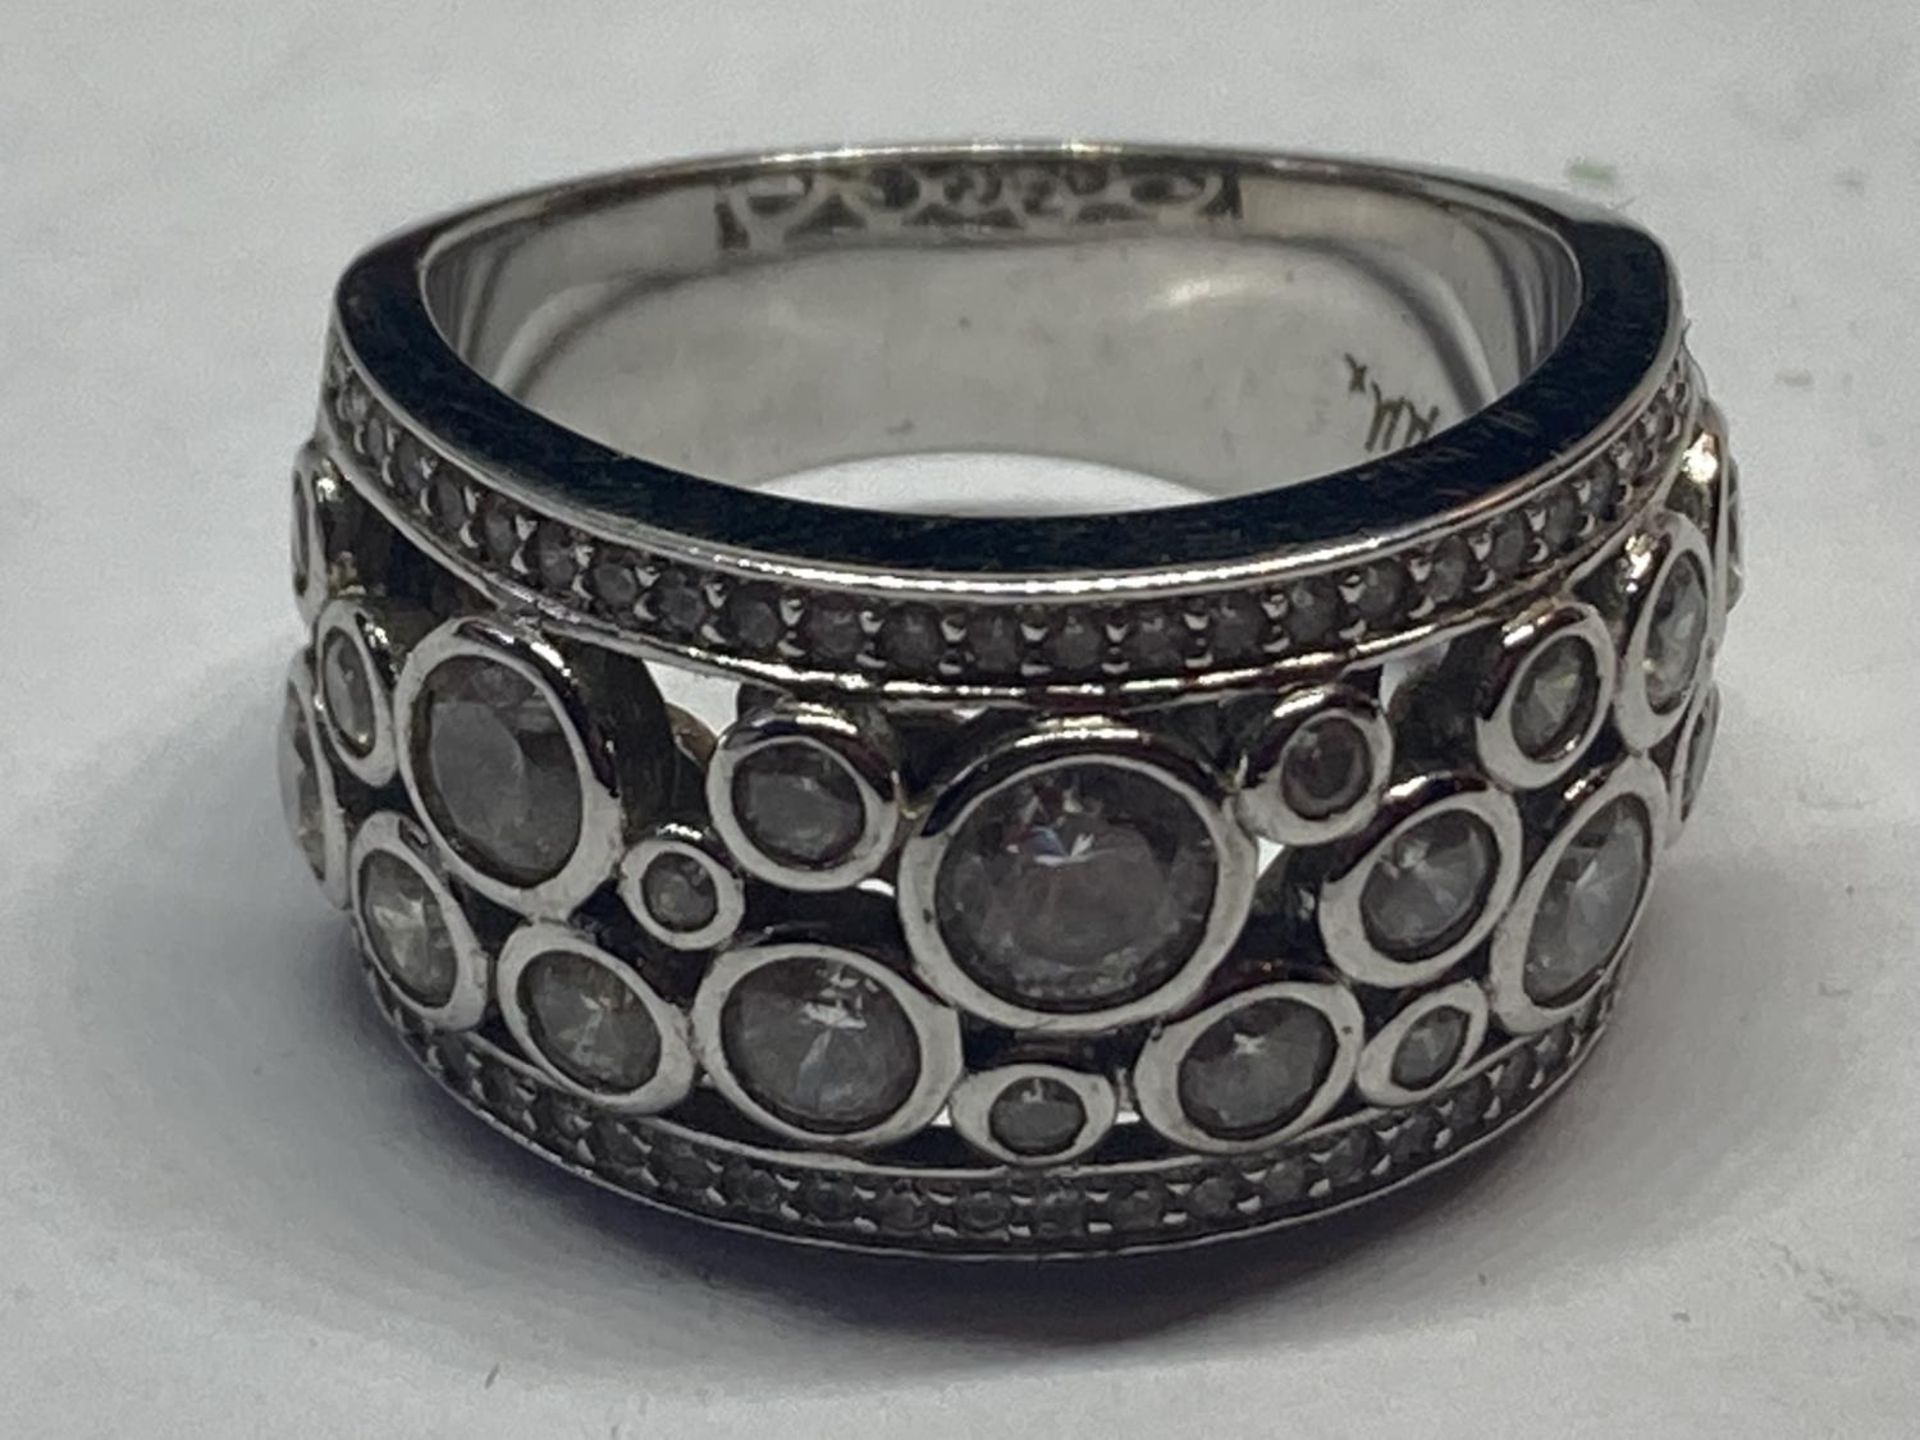 A SILVER DRESS RING IN A PRESENTATION BOX - Image 2 of 4